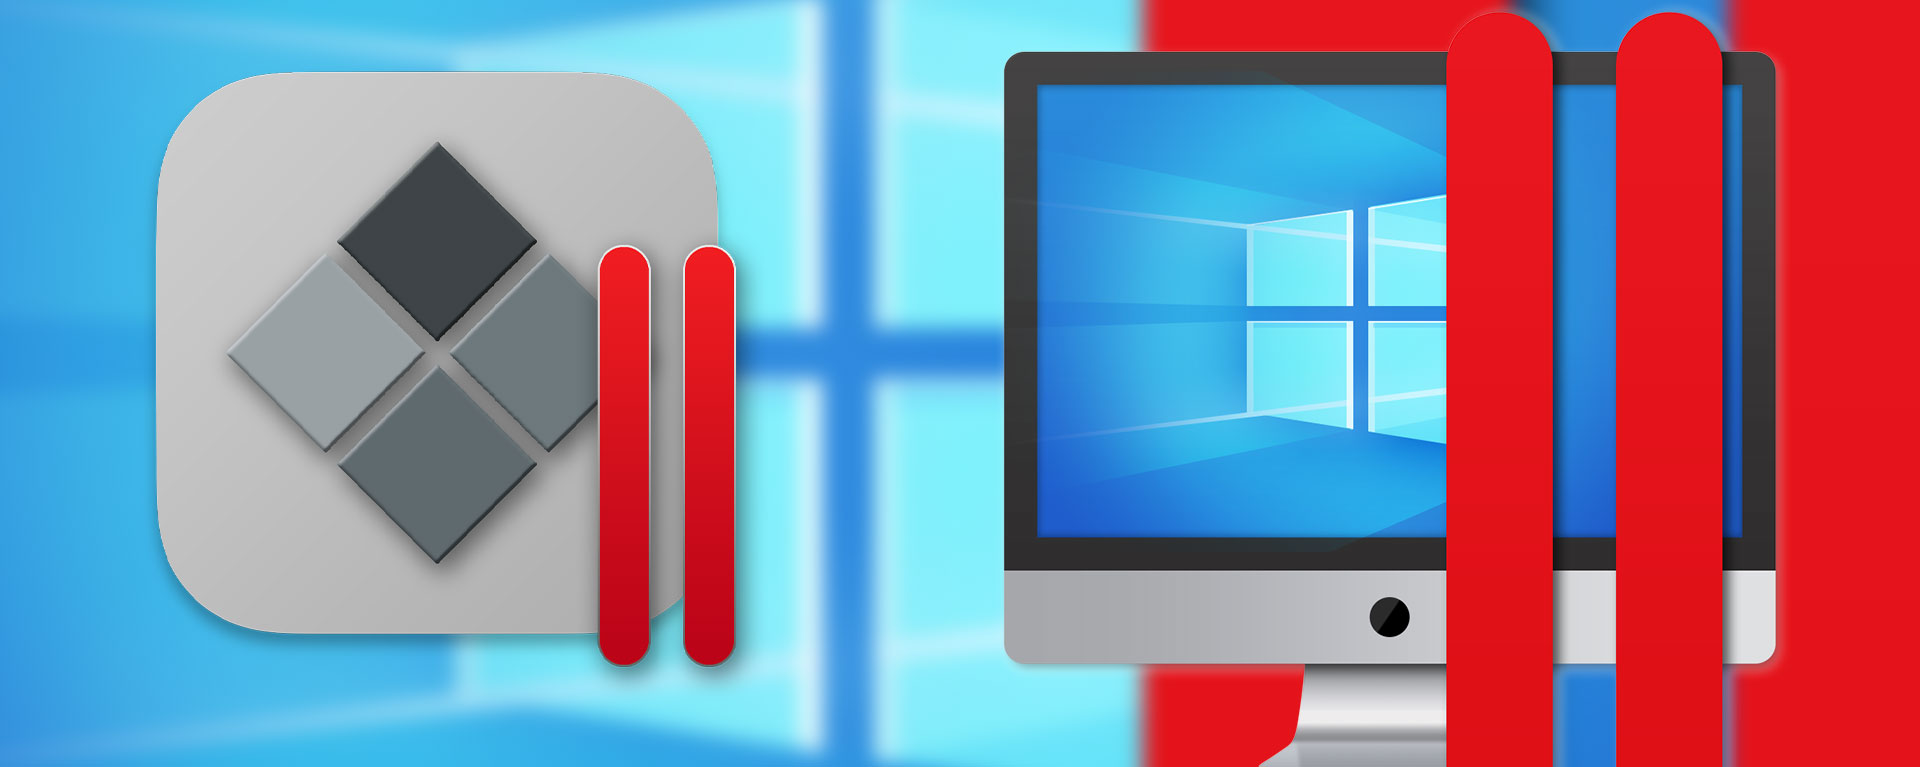 Parallels Desktop Boot Camp Dock Icon Feature Image